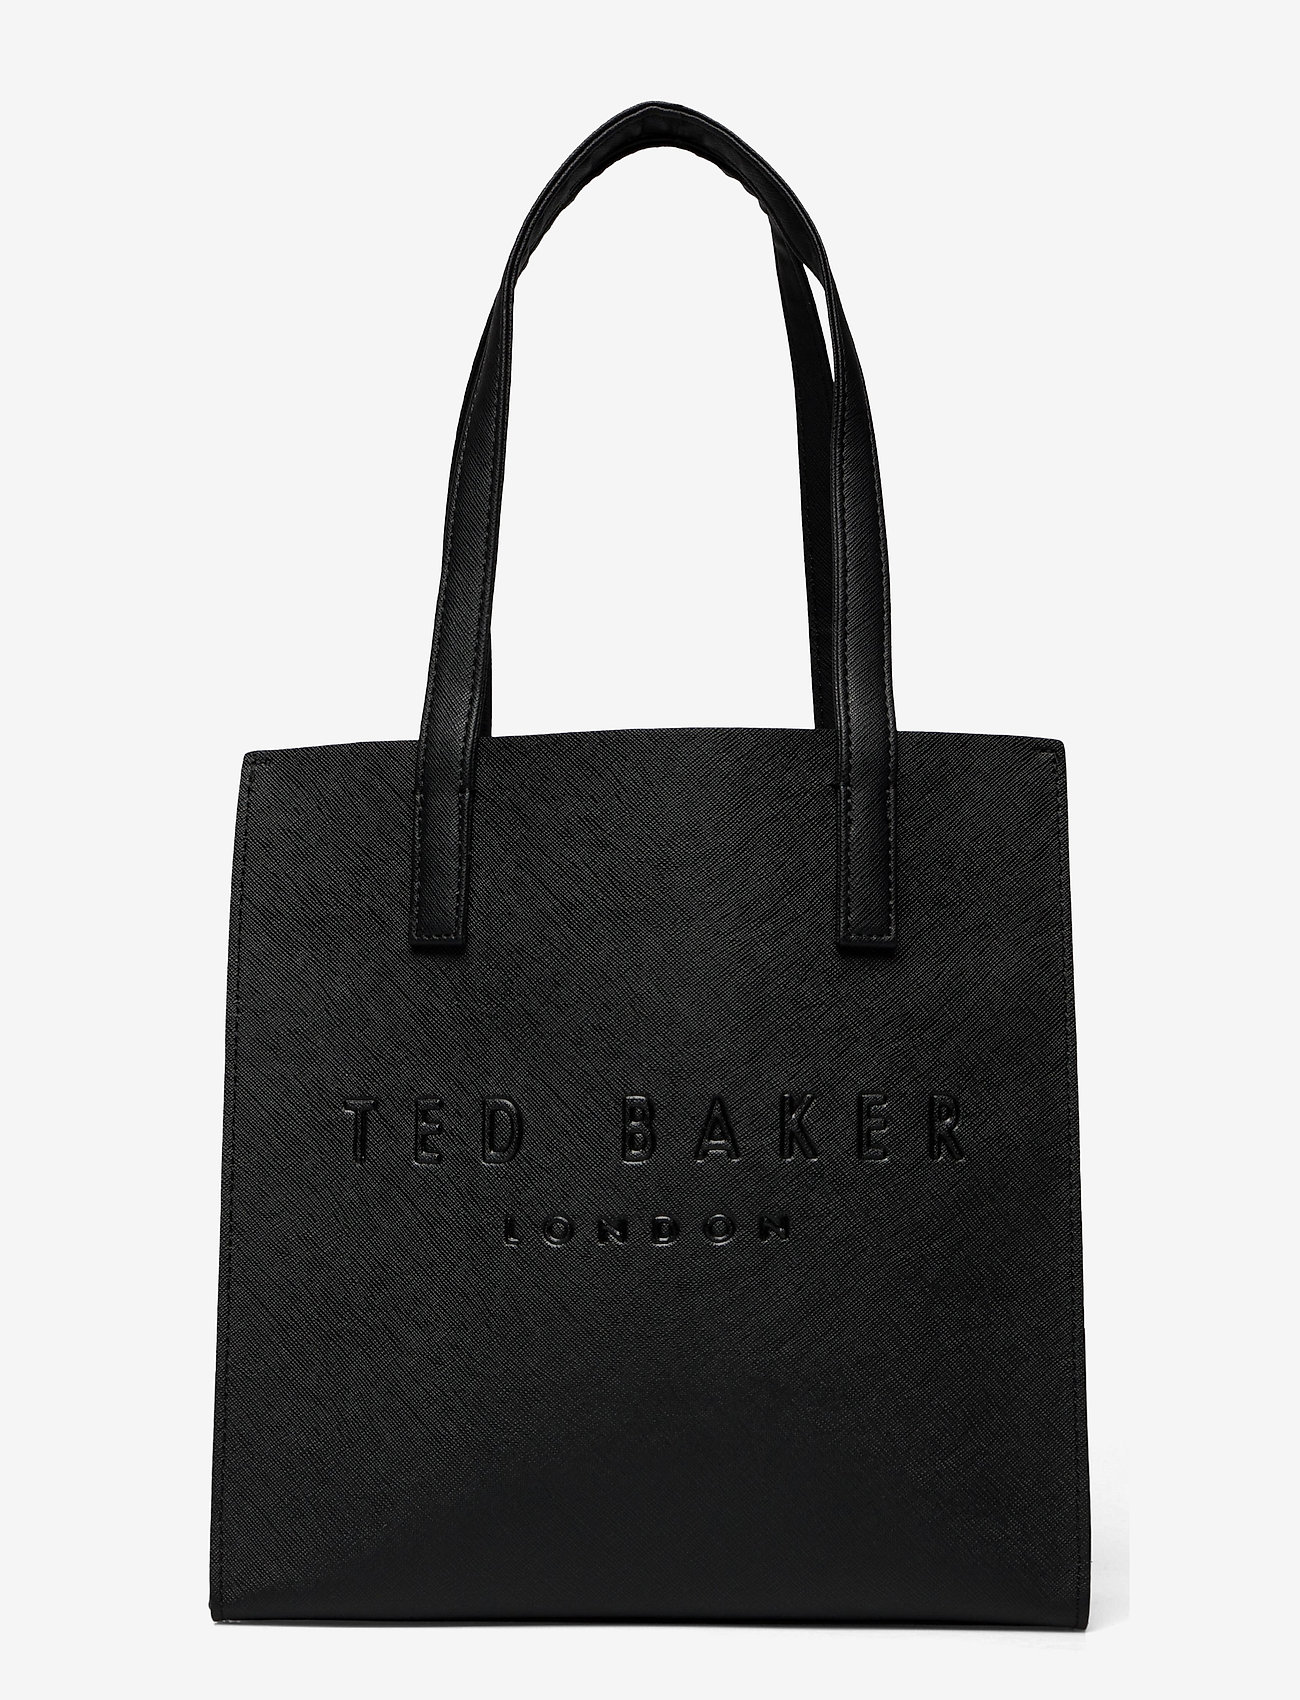 Ted Baker Seacon - Shoppers & Tote Bags | Boozt.com